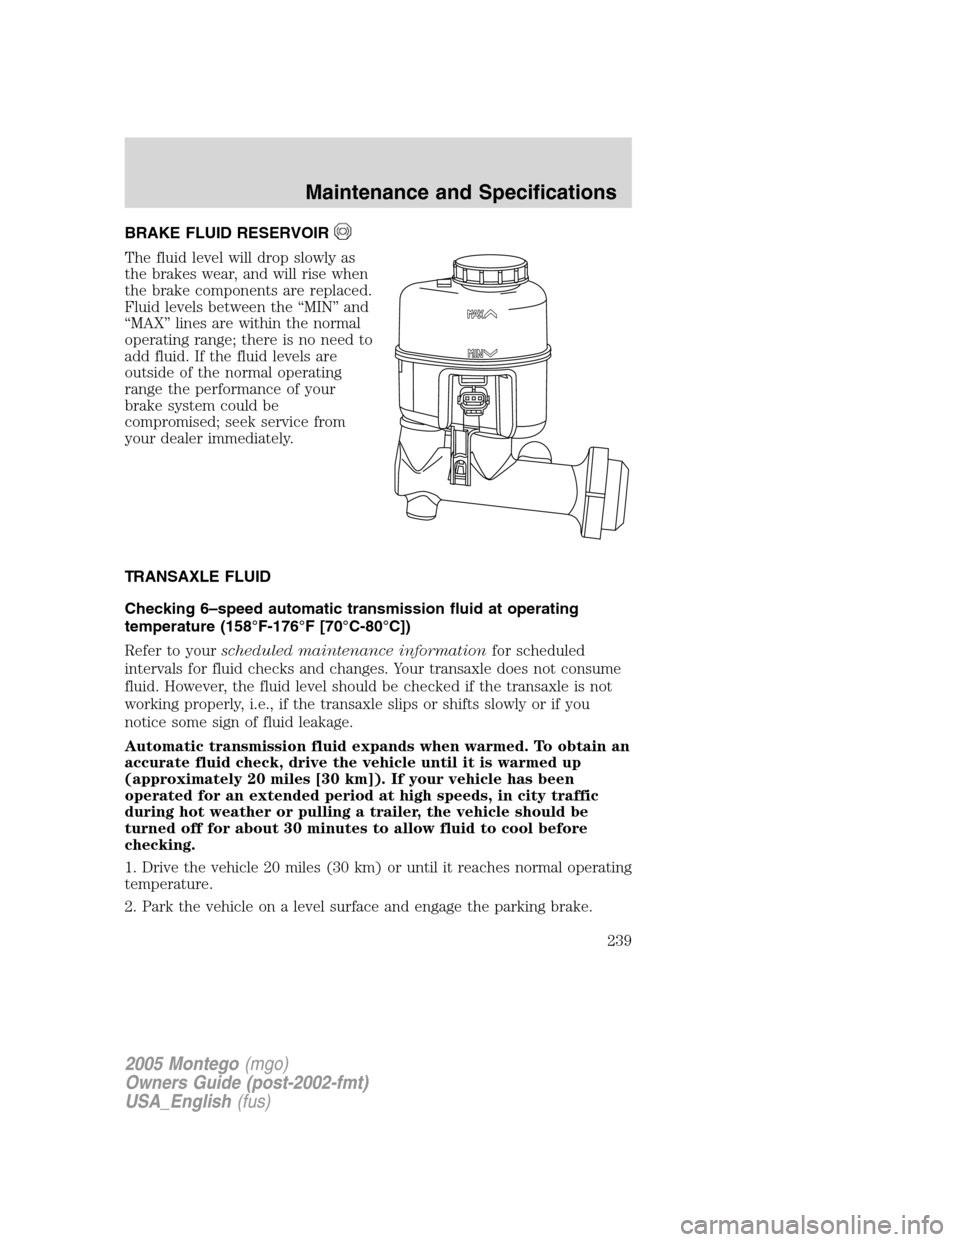 Mercury Montego 2005  Owners Manuals BRAKE FLUID RESERVOIR
The fluid level will drop slowly as
the brakes wear, and will rise when
the brake components are replaced.
Fluid levels between the “MIN” and
“MAX” lines are within the n